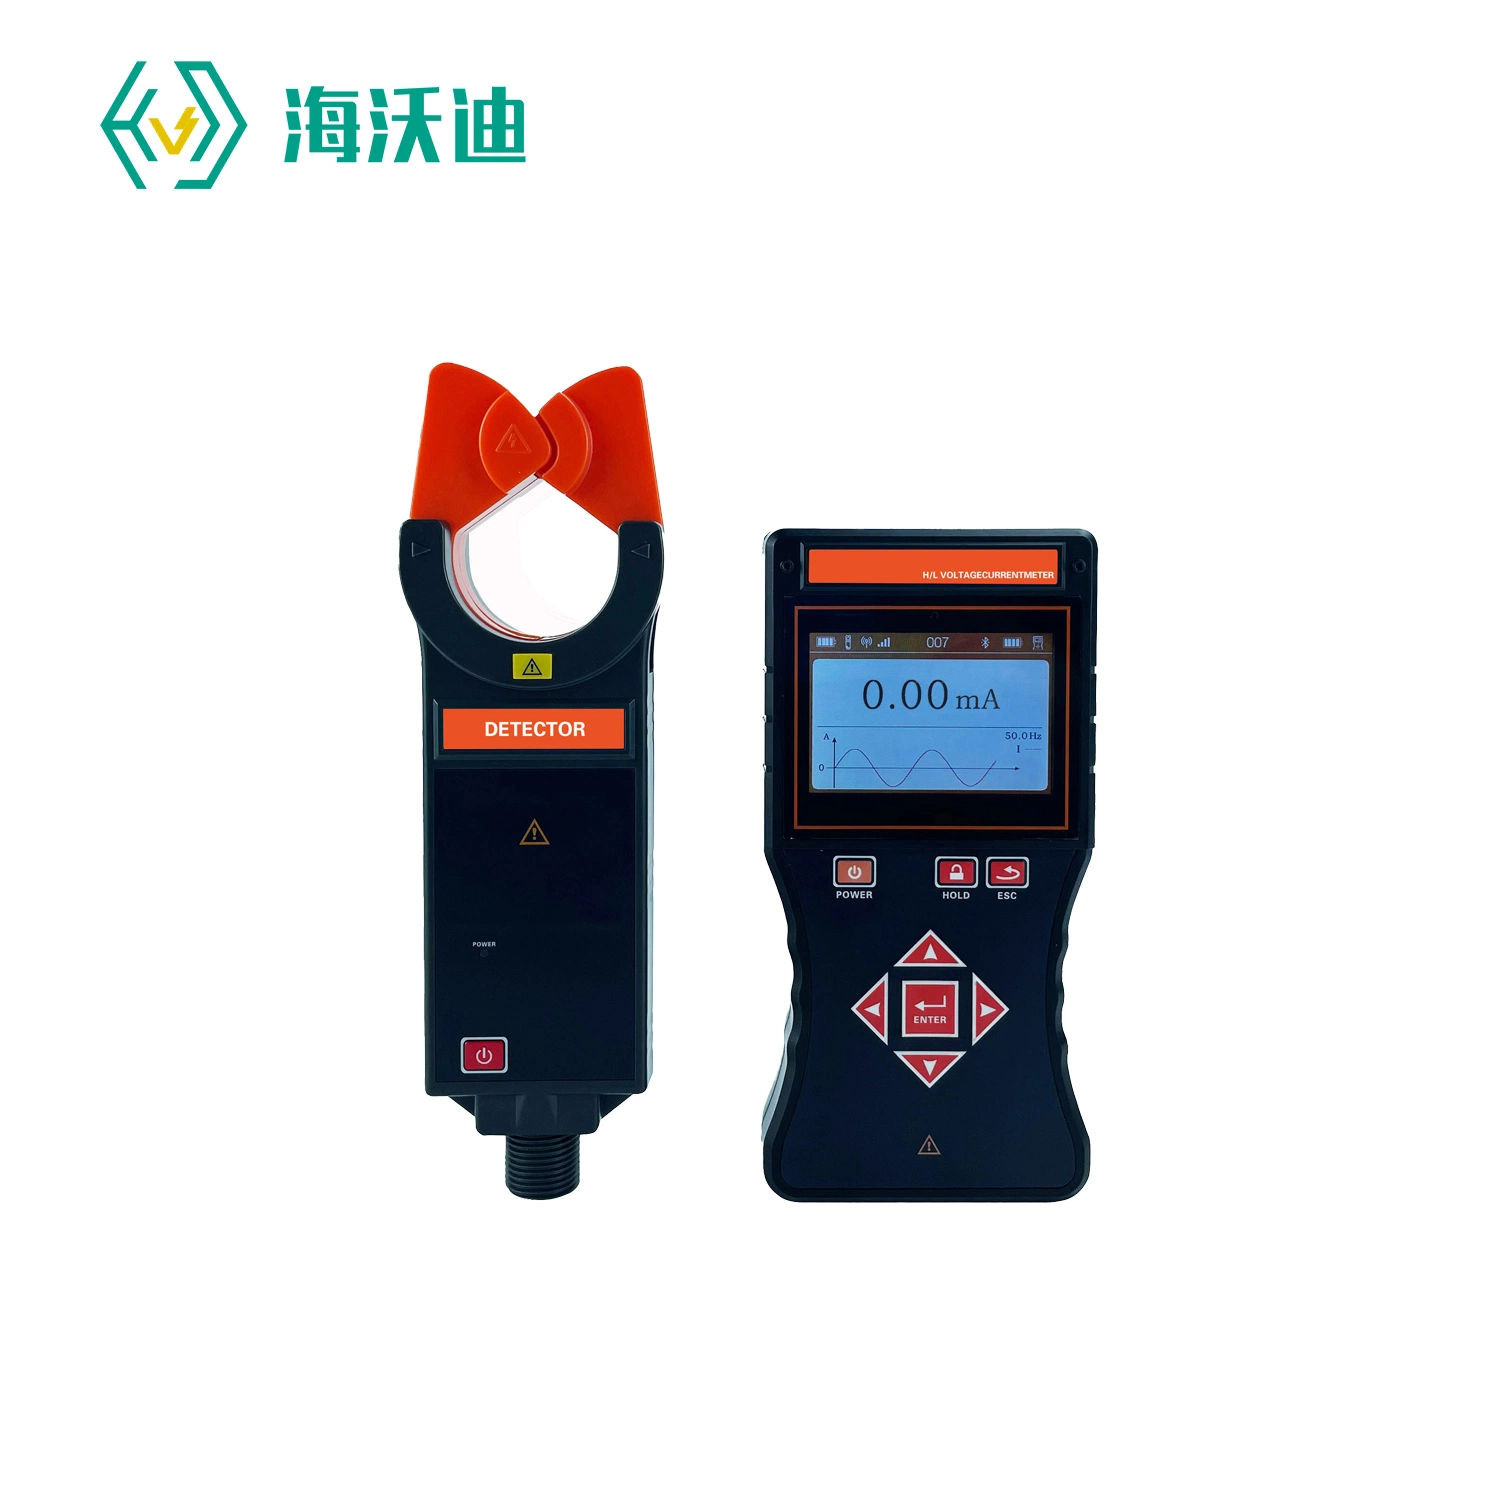 Hvd-Yc200 Clamp Leakage Current Meter High and Low Voltage Clamp Leakage Current Meter